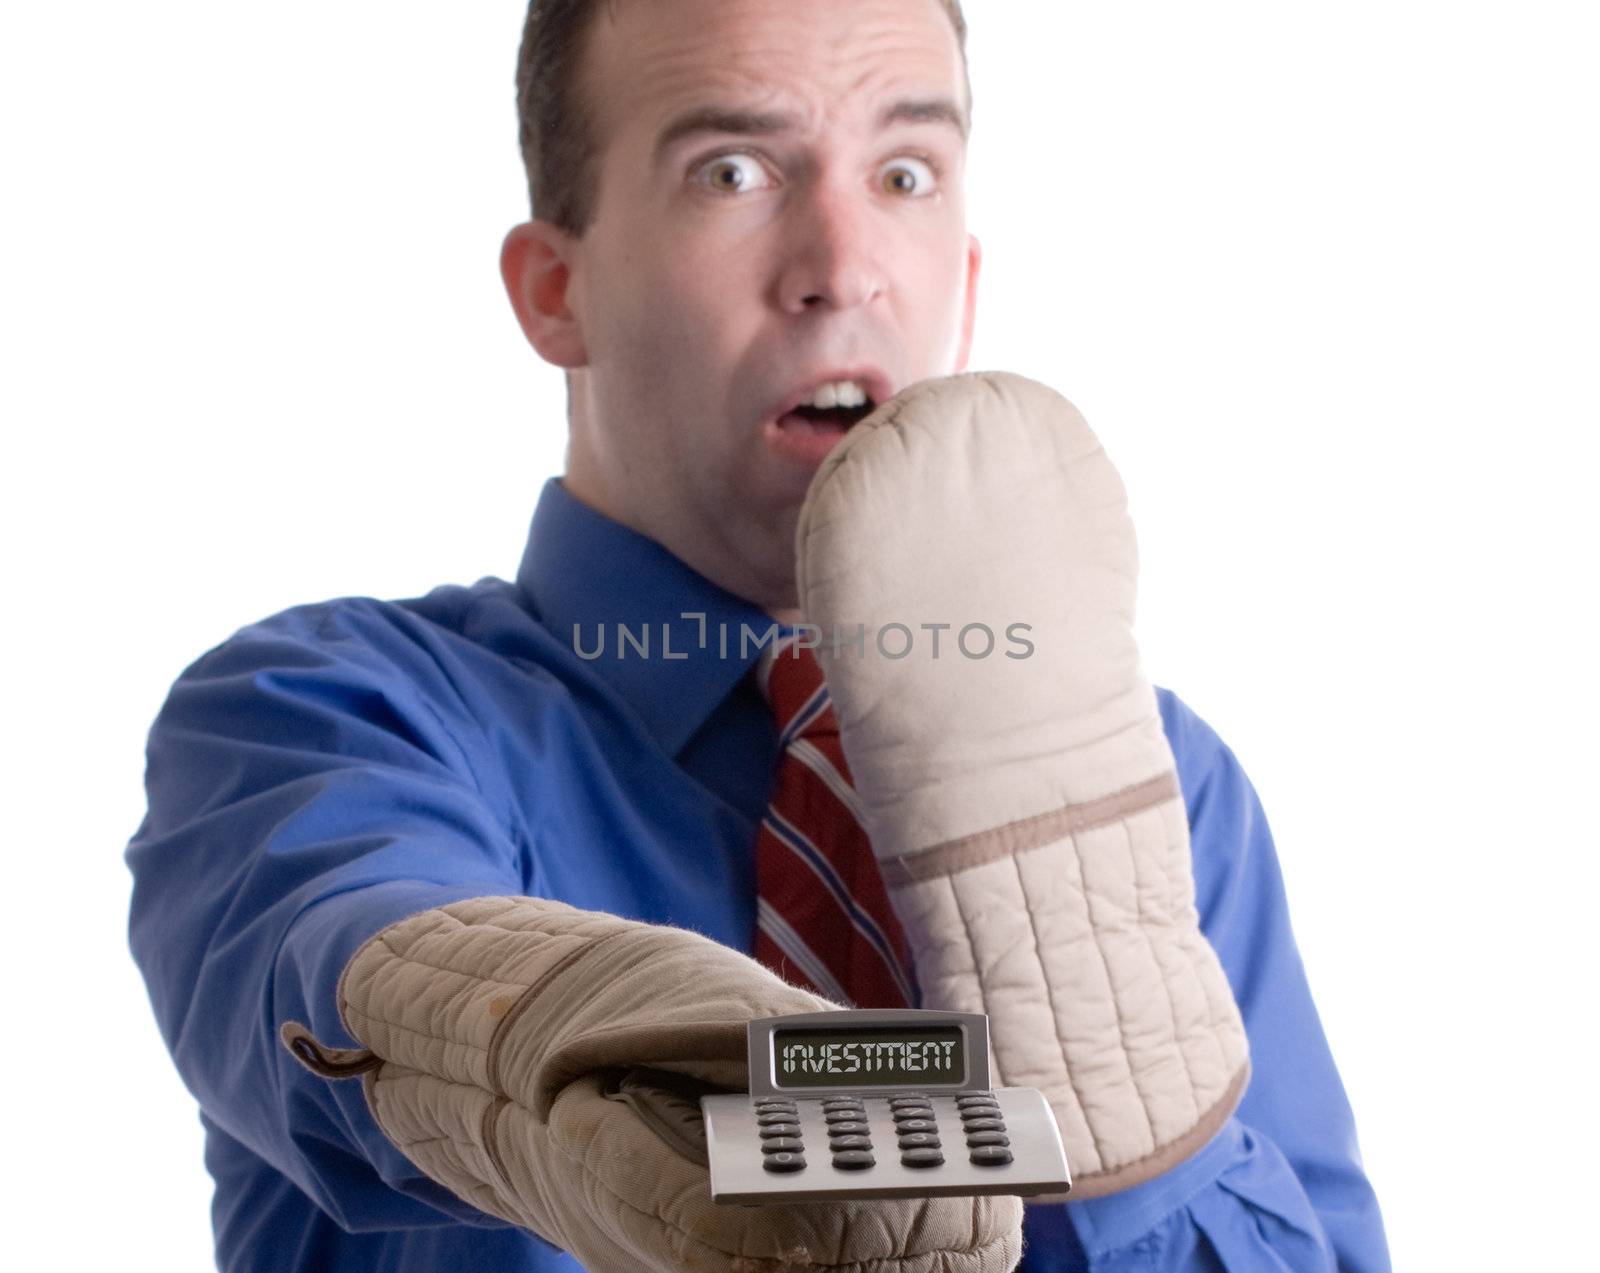 Concept image of a nervous banker holding onto his investment with oven mitts, isolated against a white background